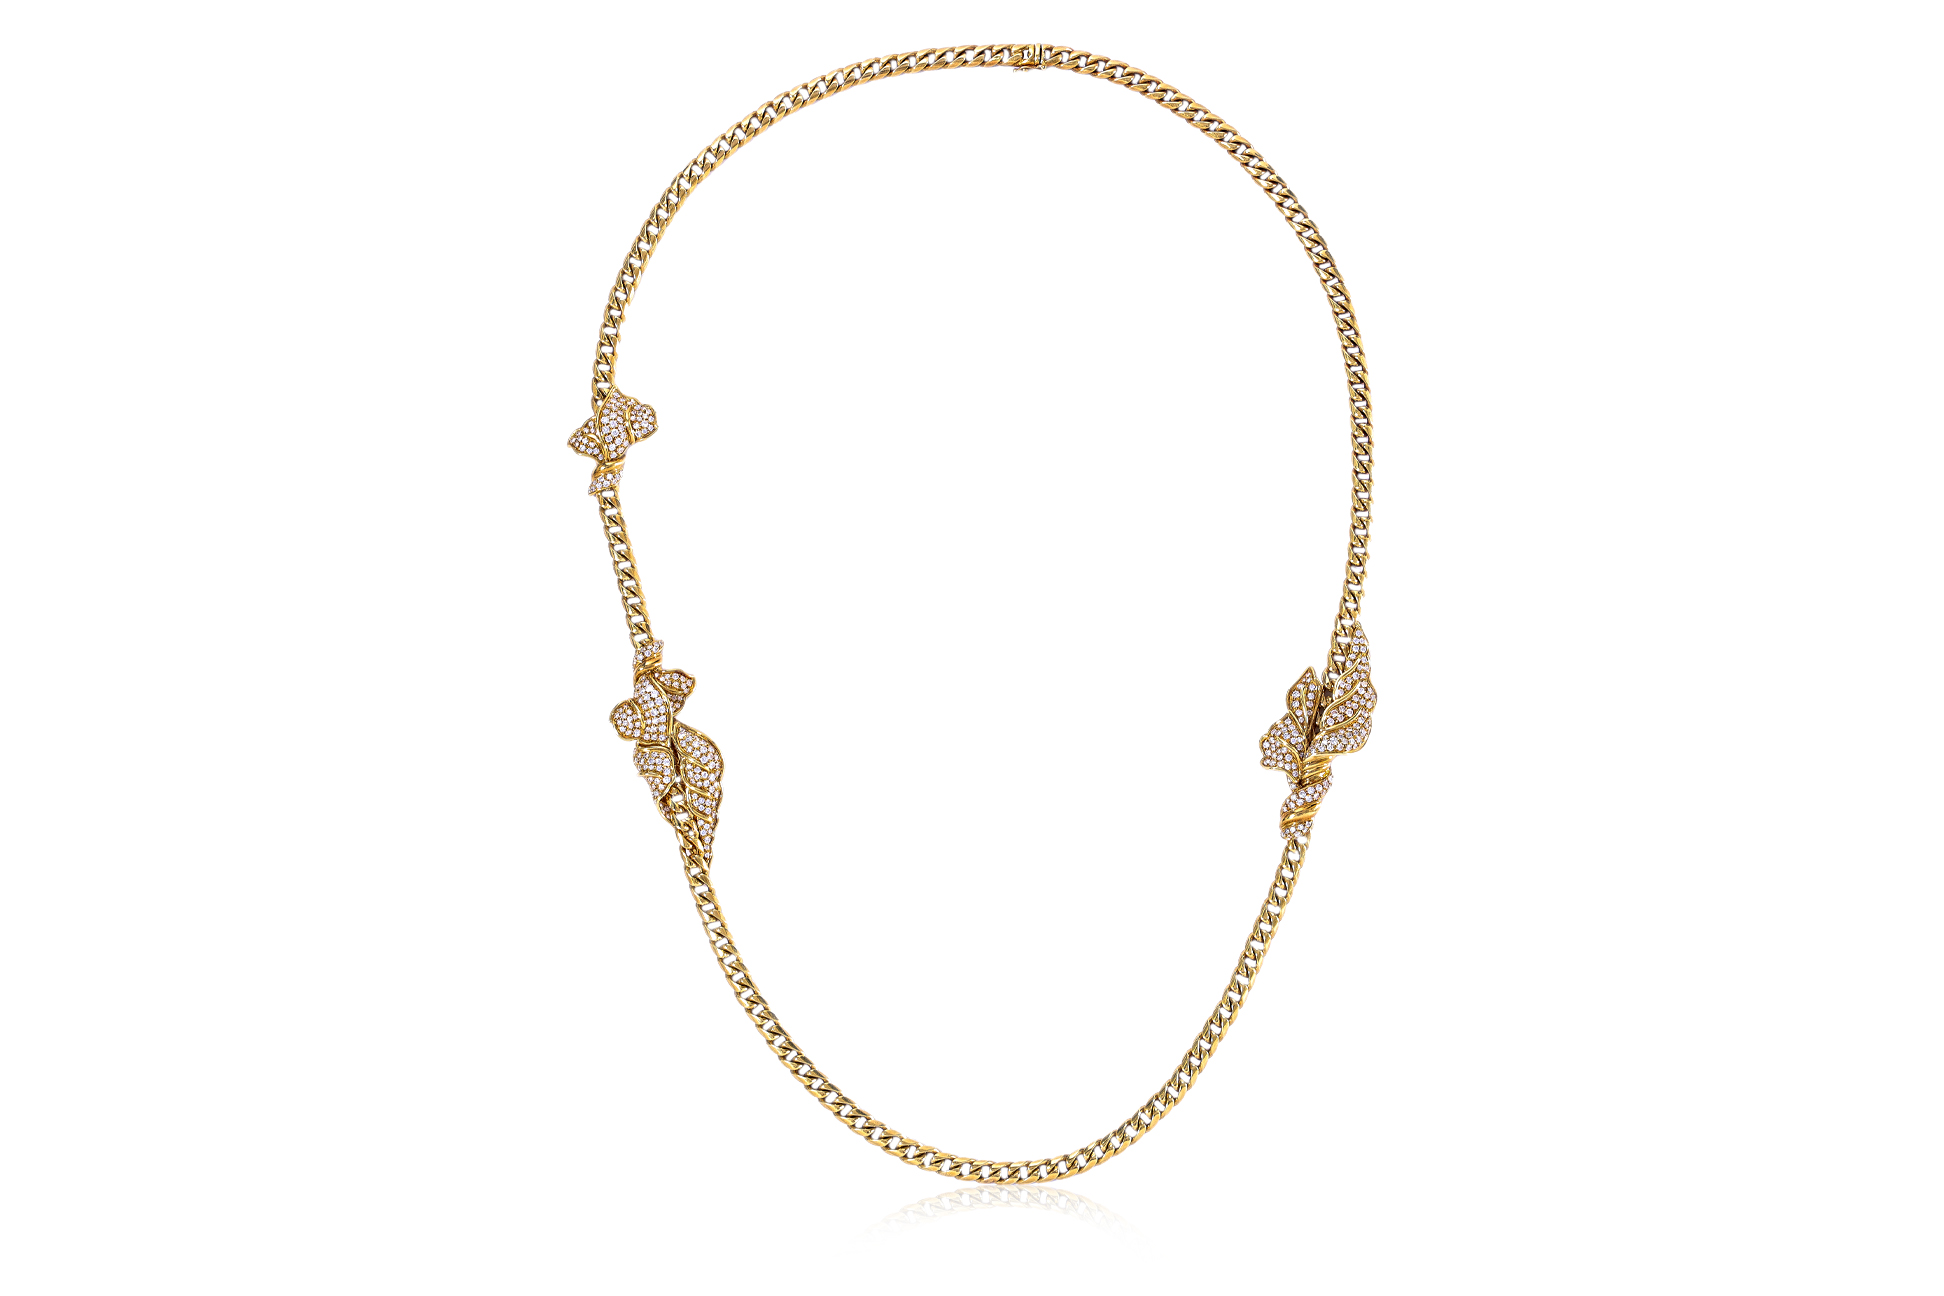 A LONG ITALIAN DIAMOND SET AND FLORAL CURB LINK CHAIN - Image 3 of 5